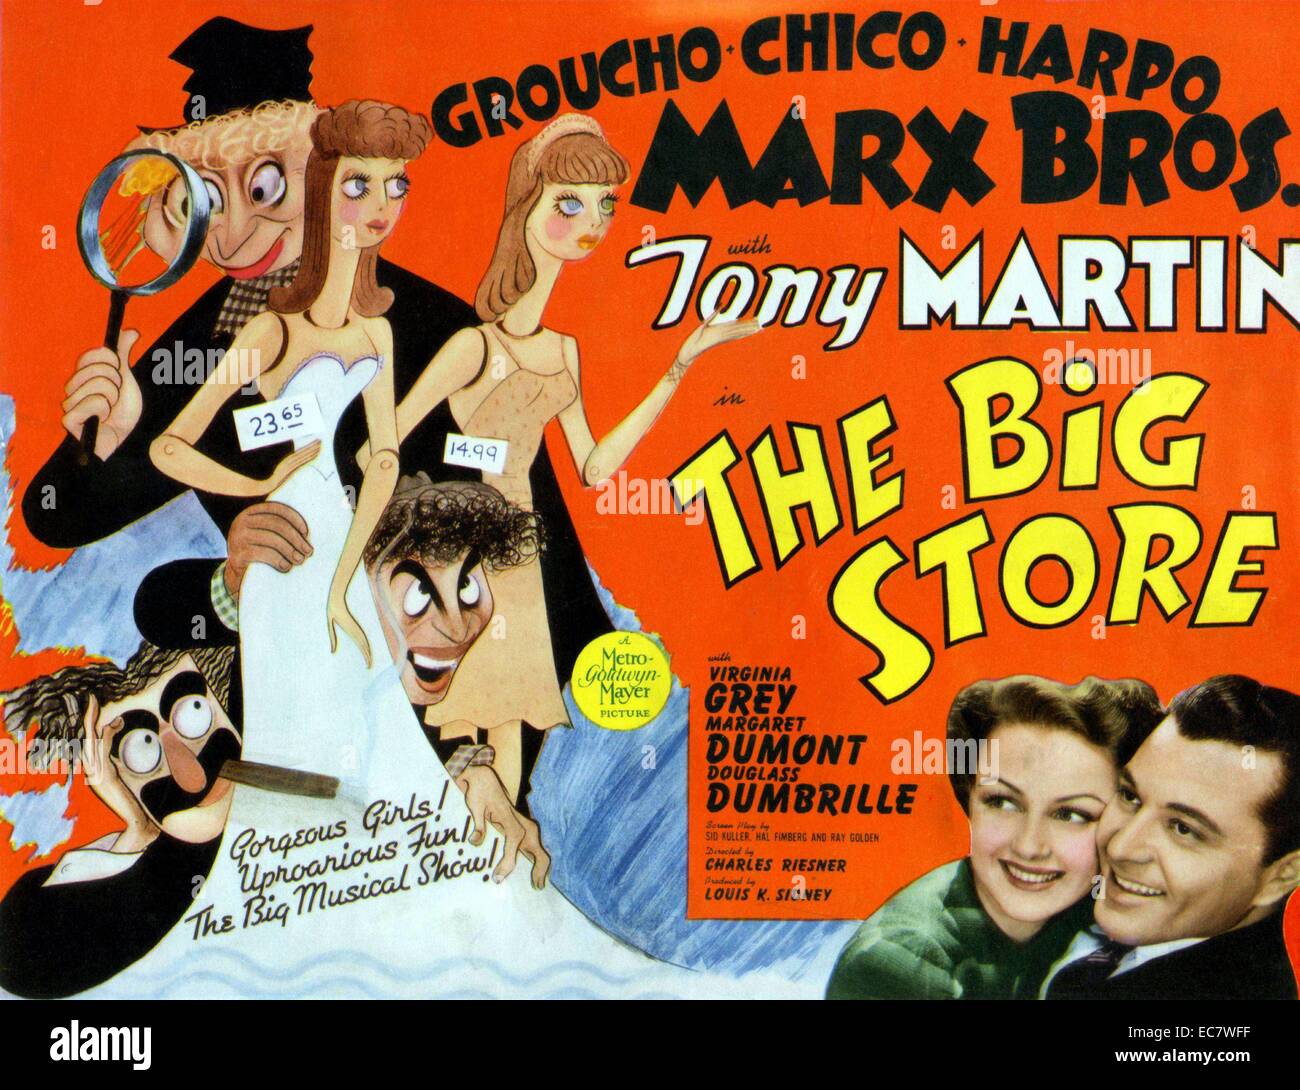 The Big Store, 1941, is a Marx Brothers comedy film in which Groucho, Chico and Harpo work to save the Phelps Department Store, owned by Martha Phelps (Margaret Dumont). Groucho plays detective Wolf J. Flywheel, a character name originating from the Marx-Perrin radio show Flywheel, Shyster, and Flywheel in the early 1930s. Stock Photo